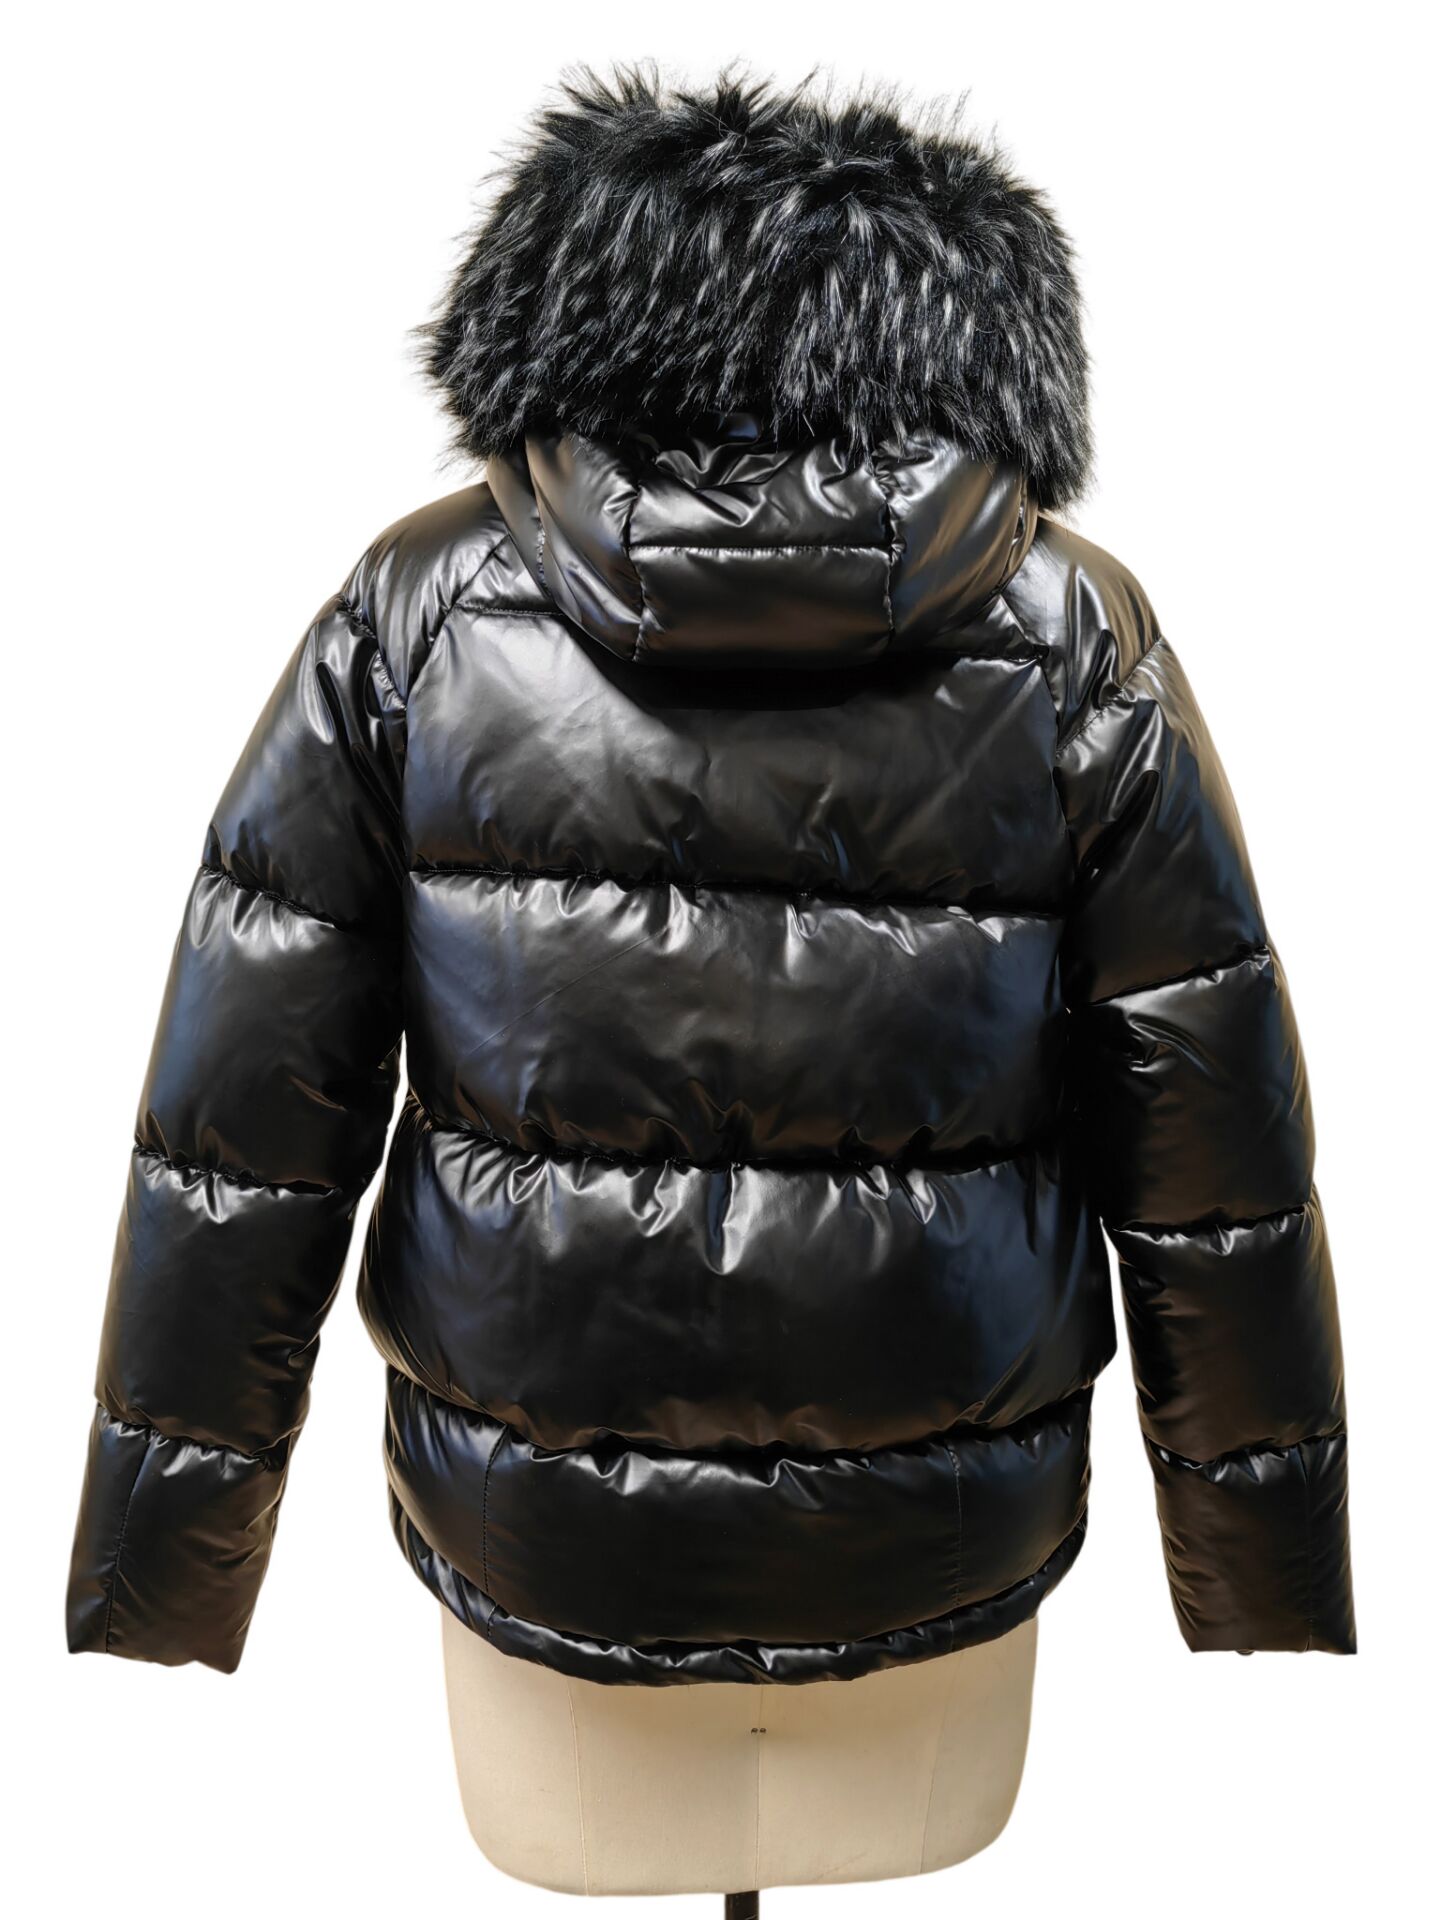 Hot Sales Heavy Padding Jacket Warm Casual Winter Puffer Jacket Supplier in China